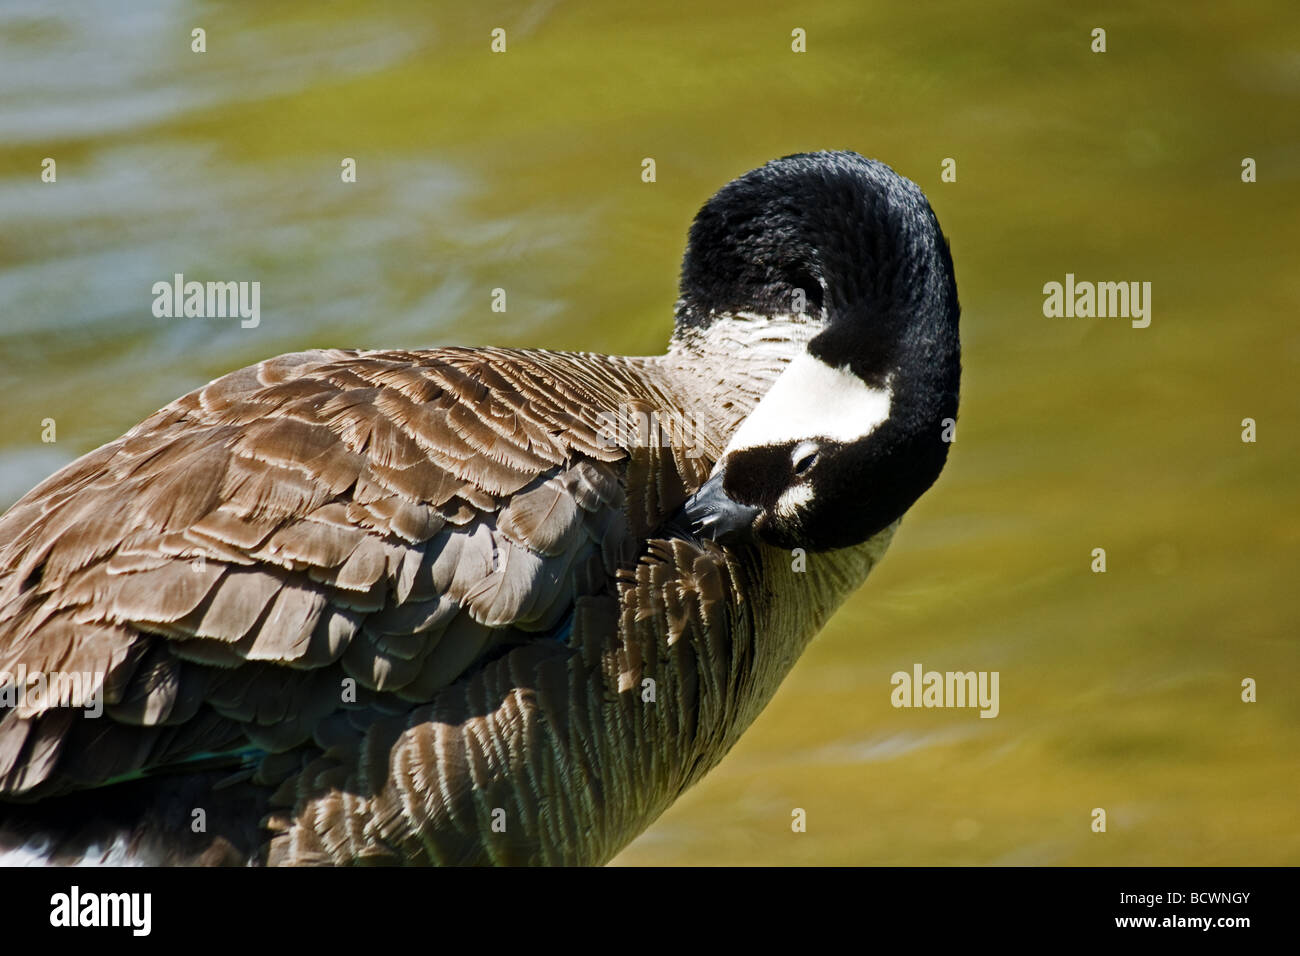 canada goose grooming feathers tight shot Stock Photo